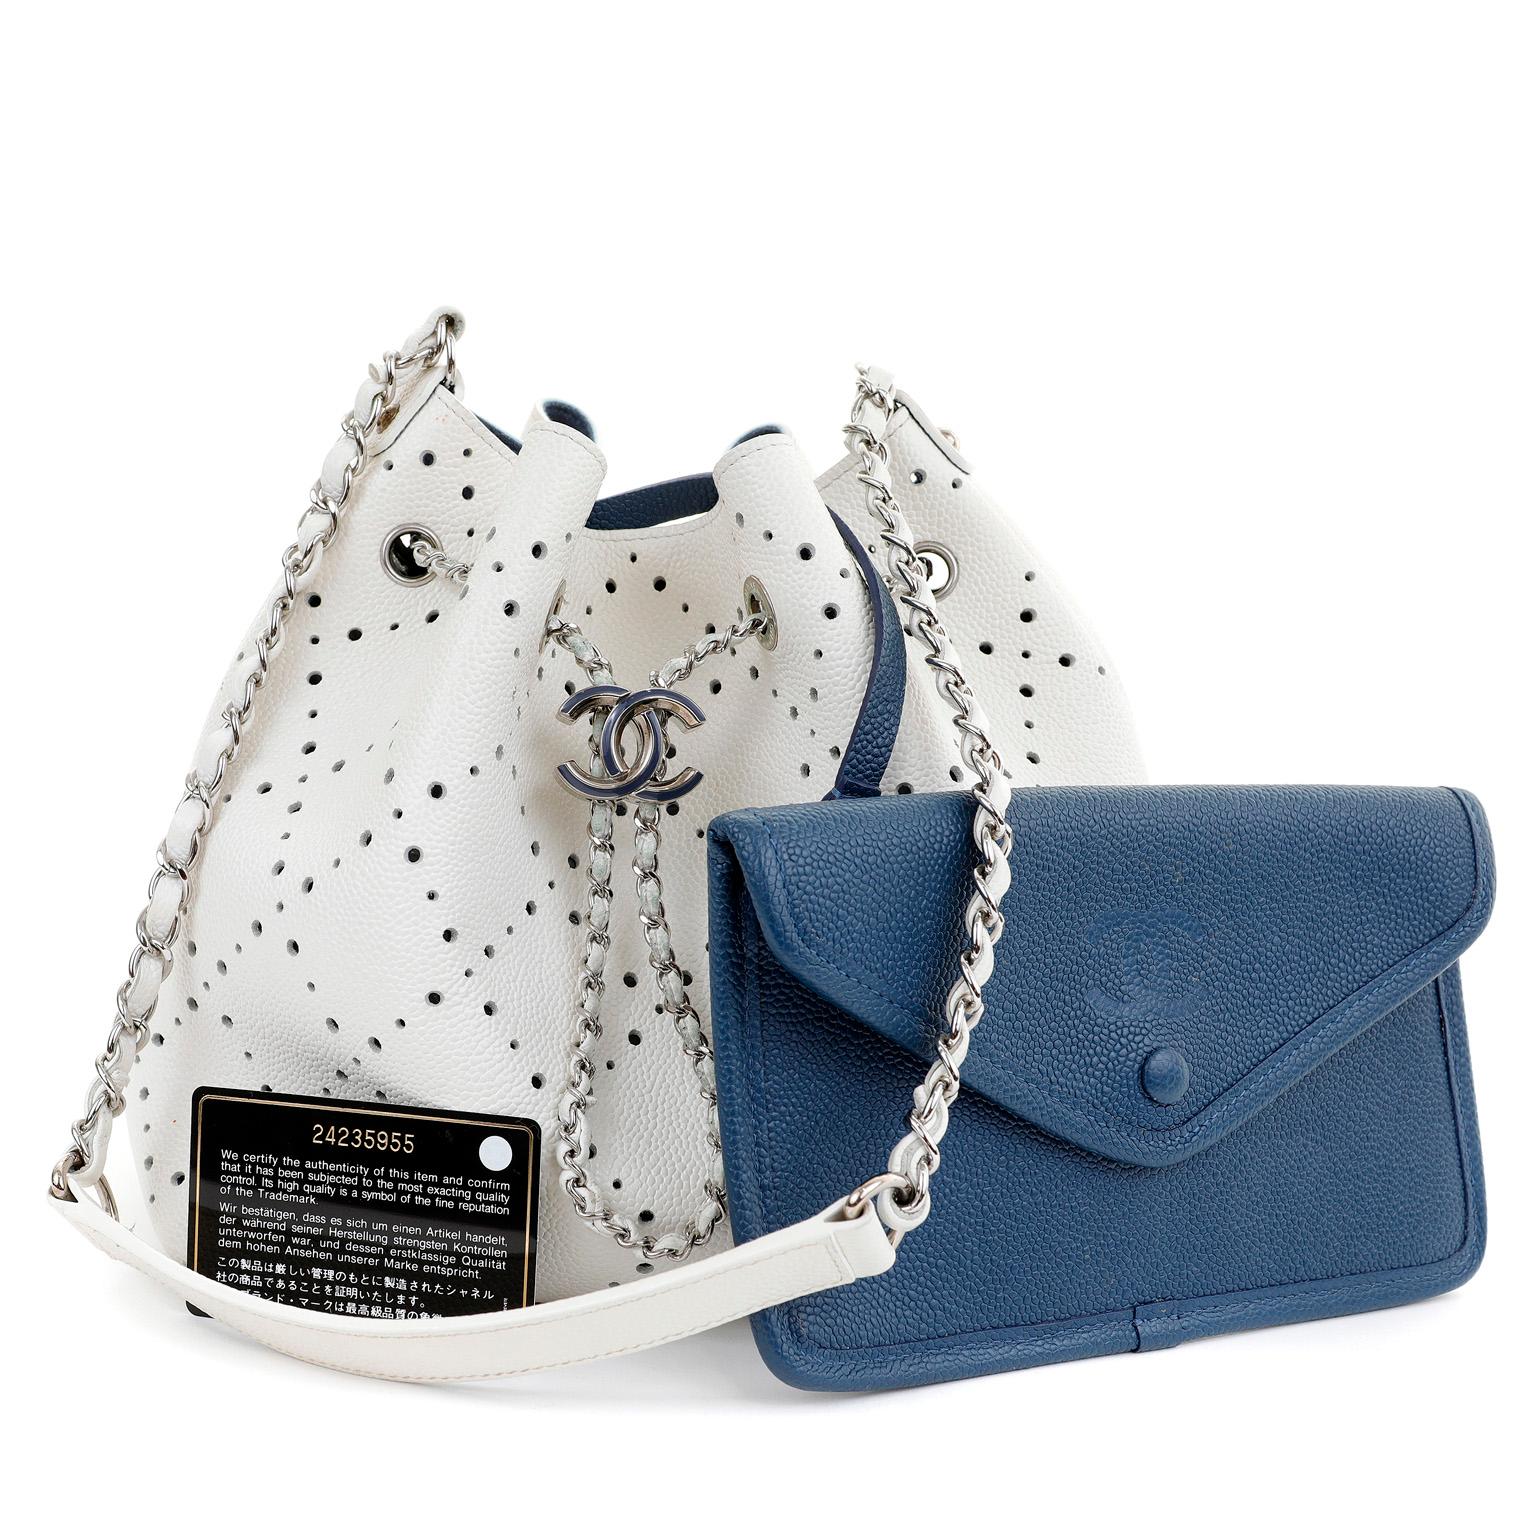 Chanel White Caviar Perforated Bucket Bag 1